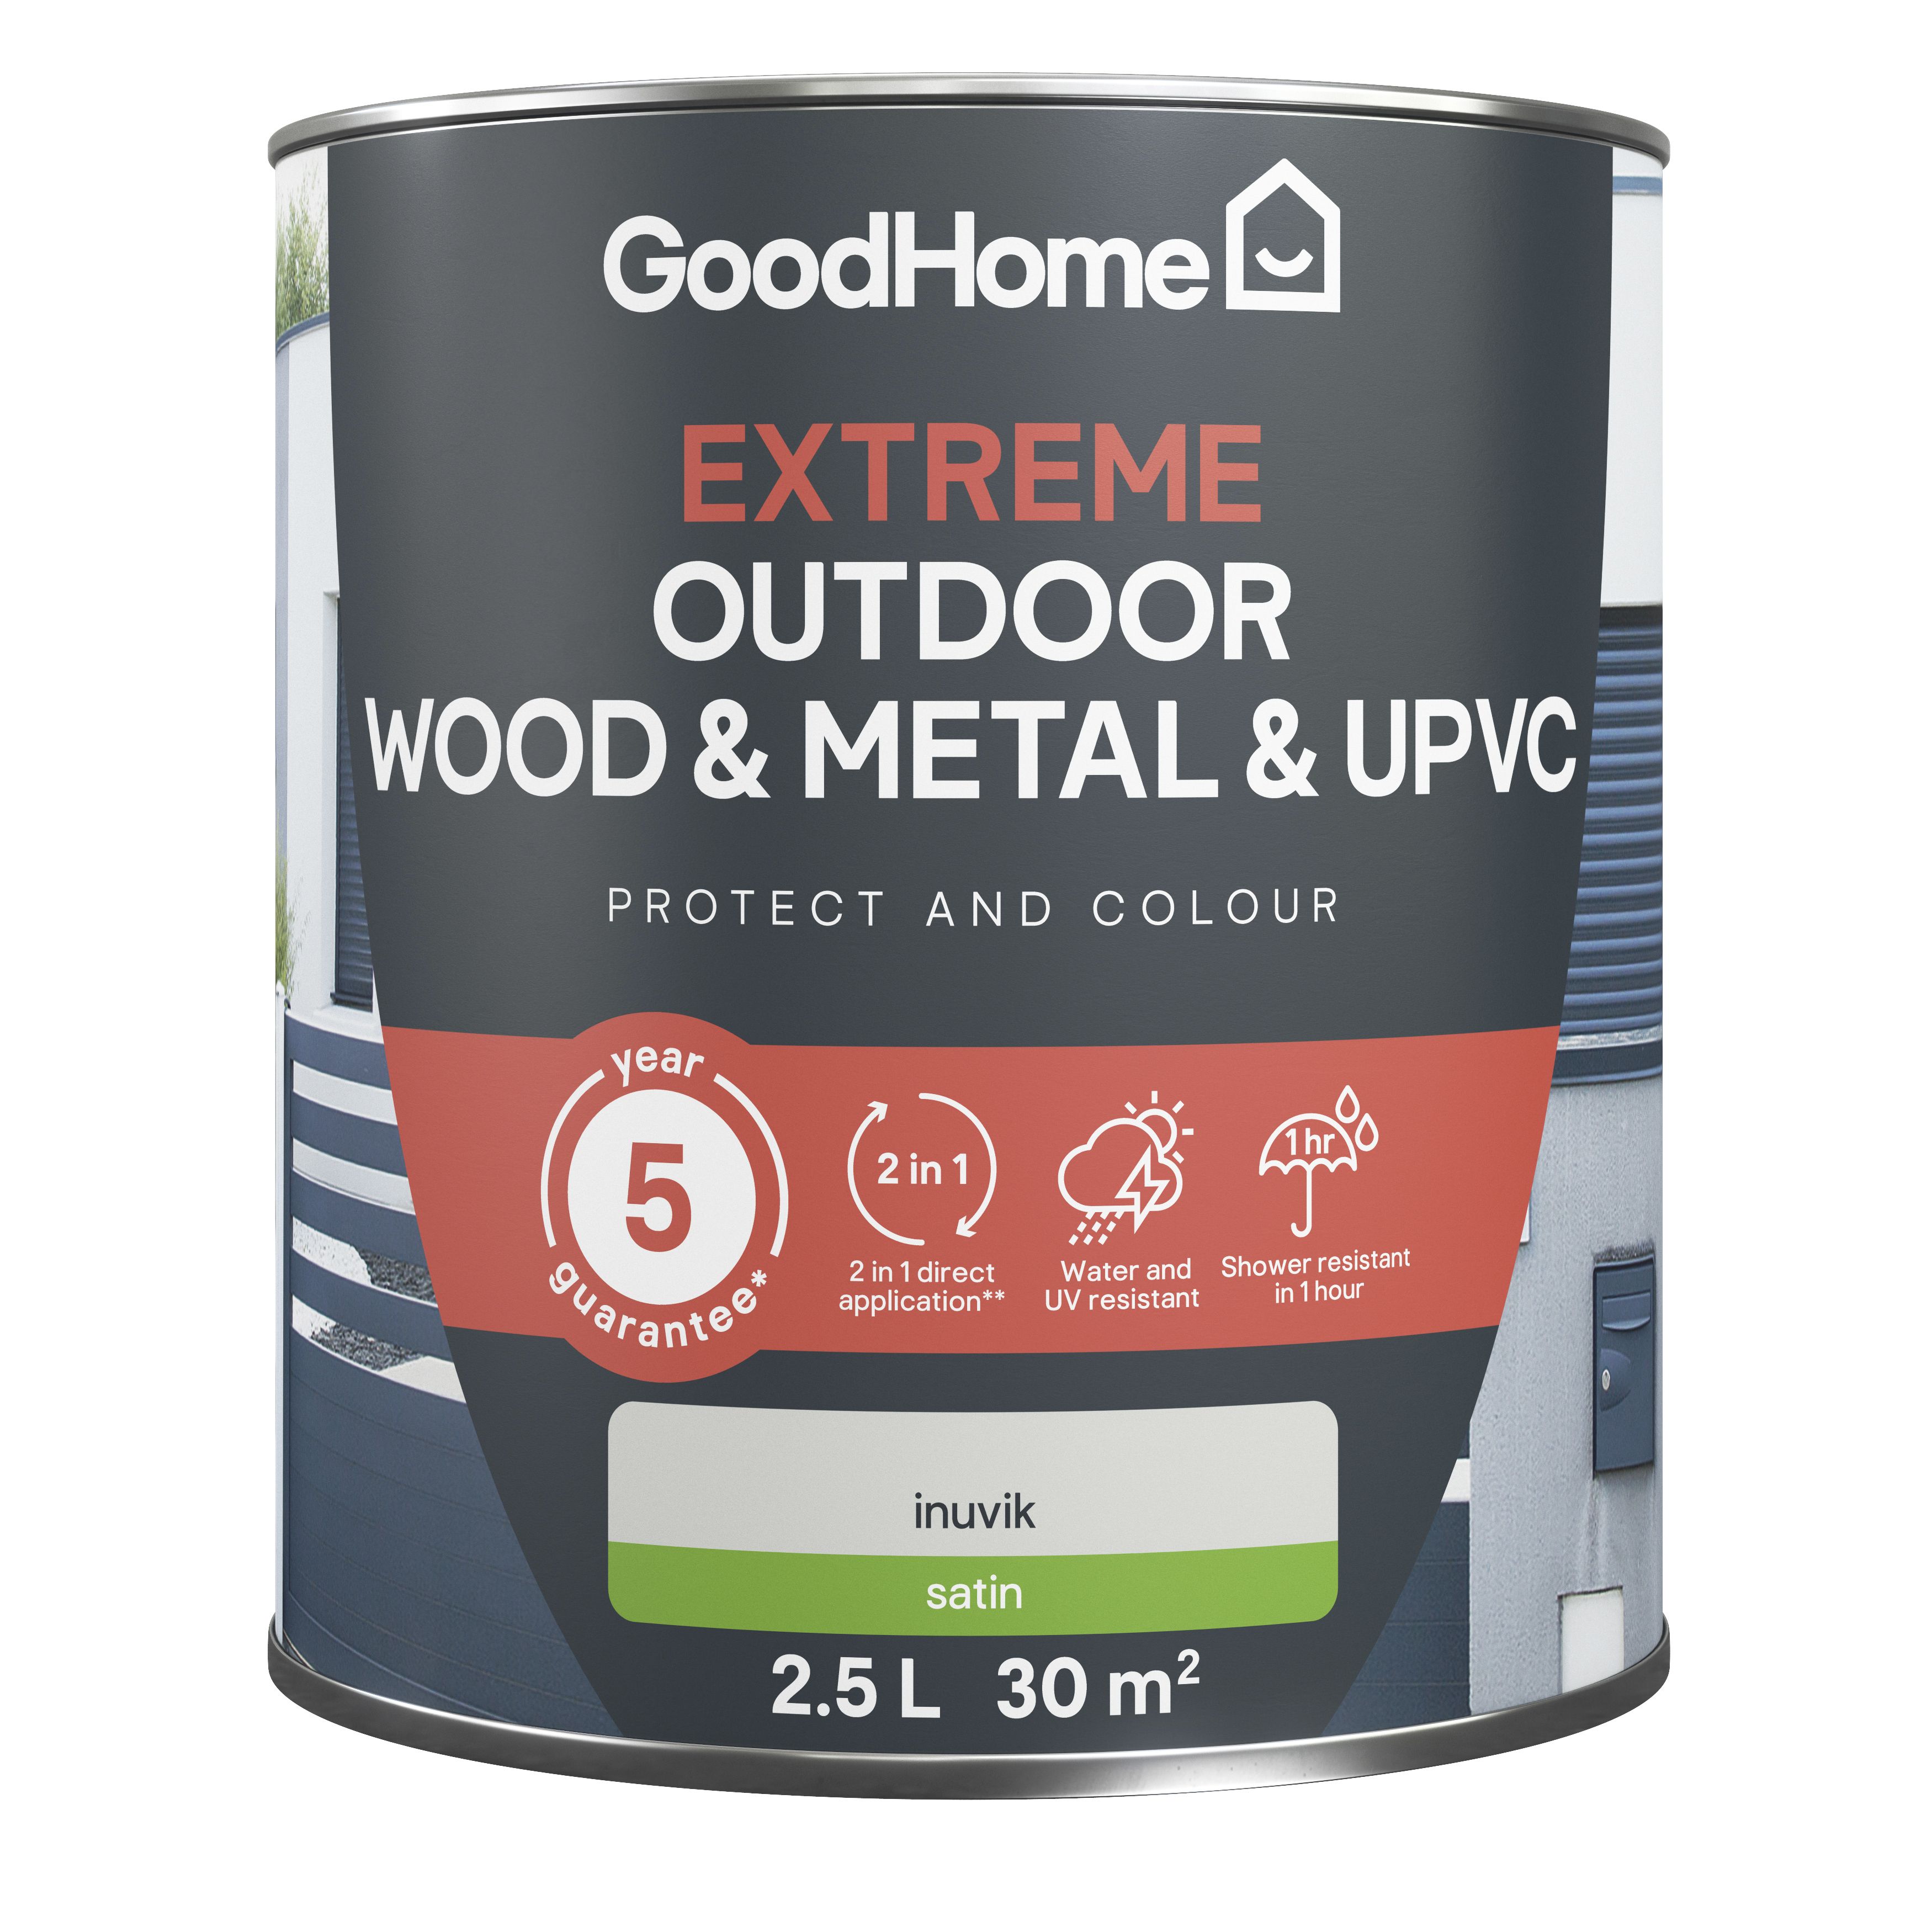 GoodHome Extreme Outdoor Inuvik Satinwood Multi-surface paint, 2.5L